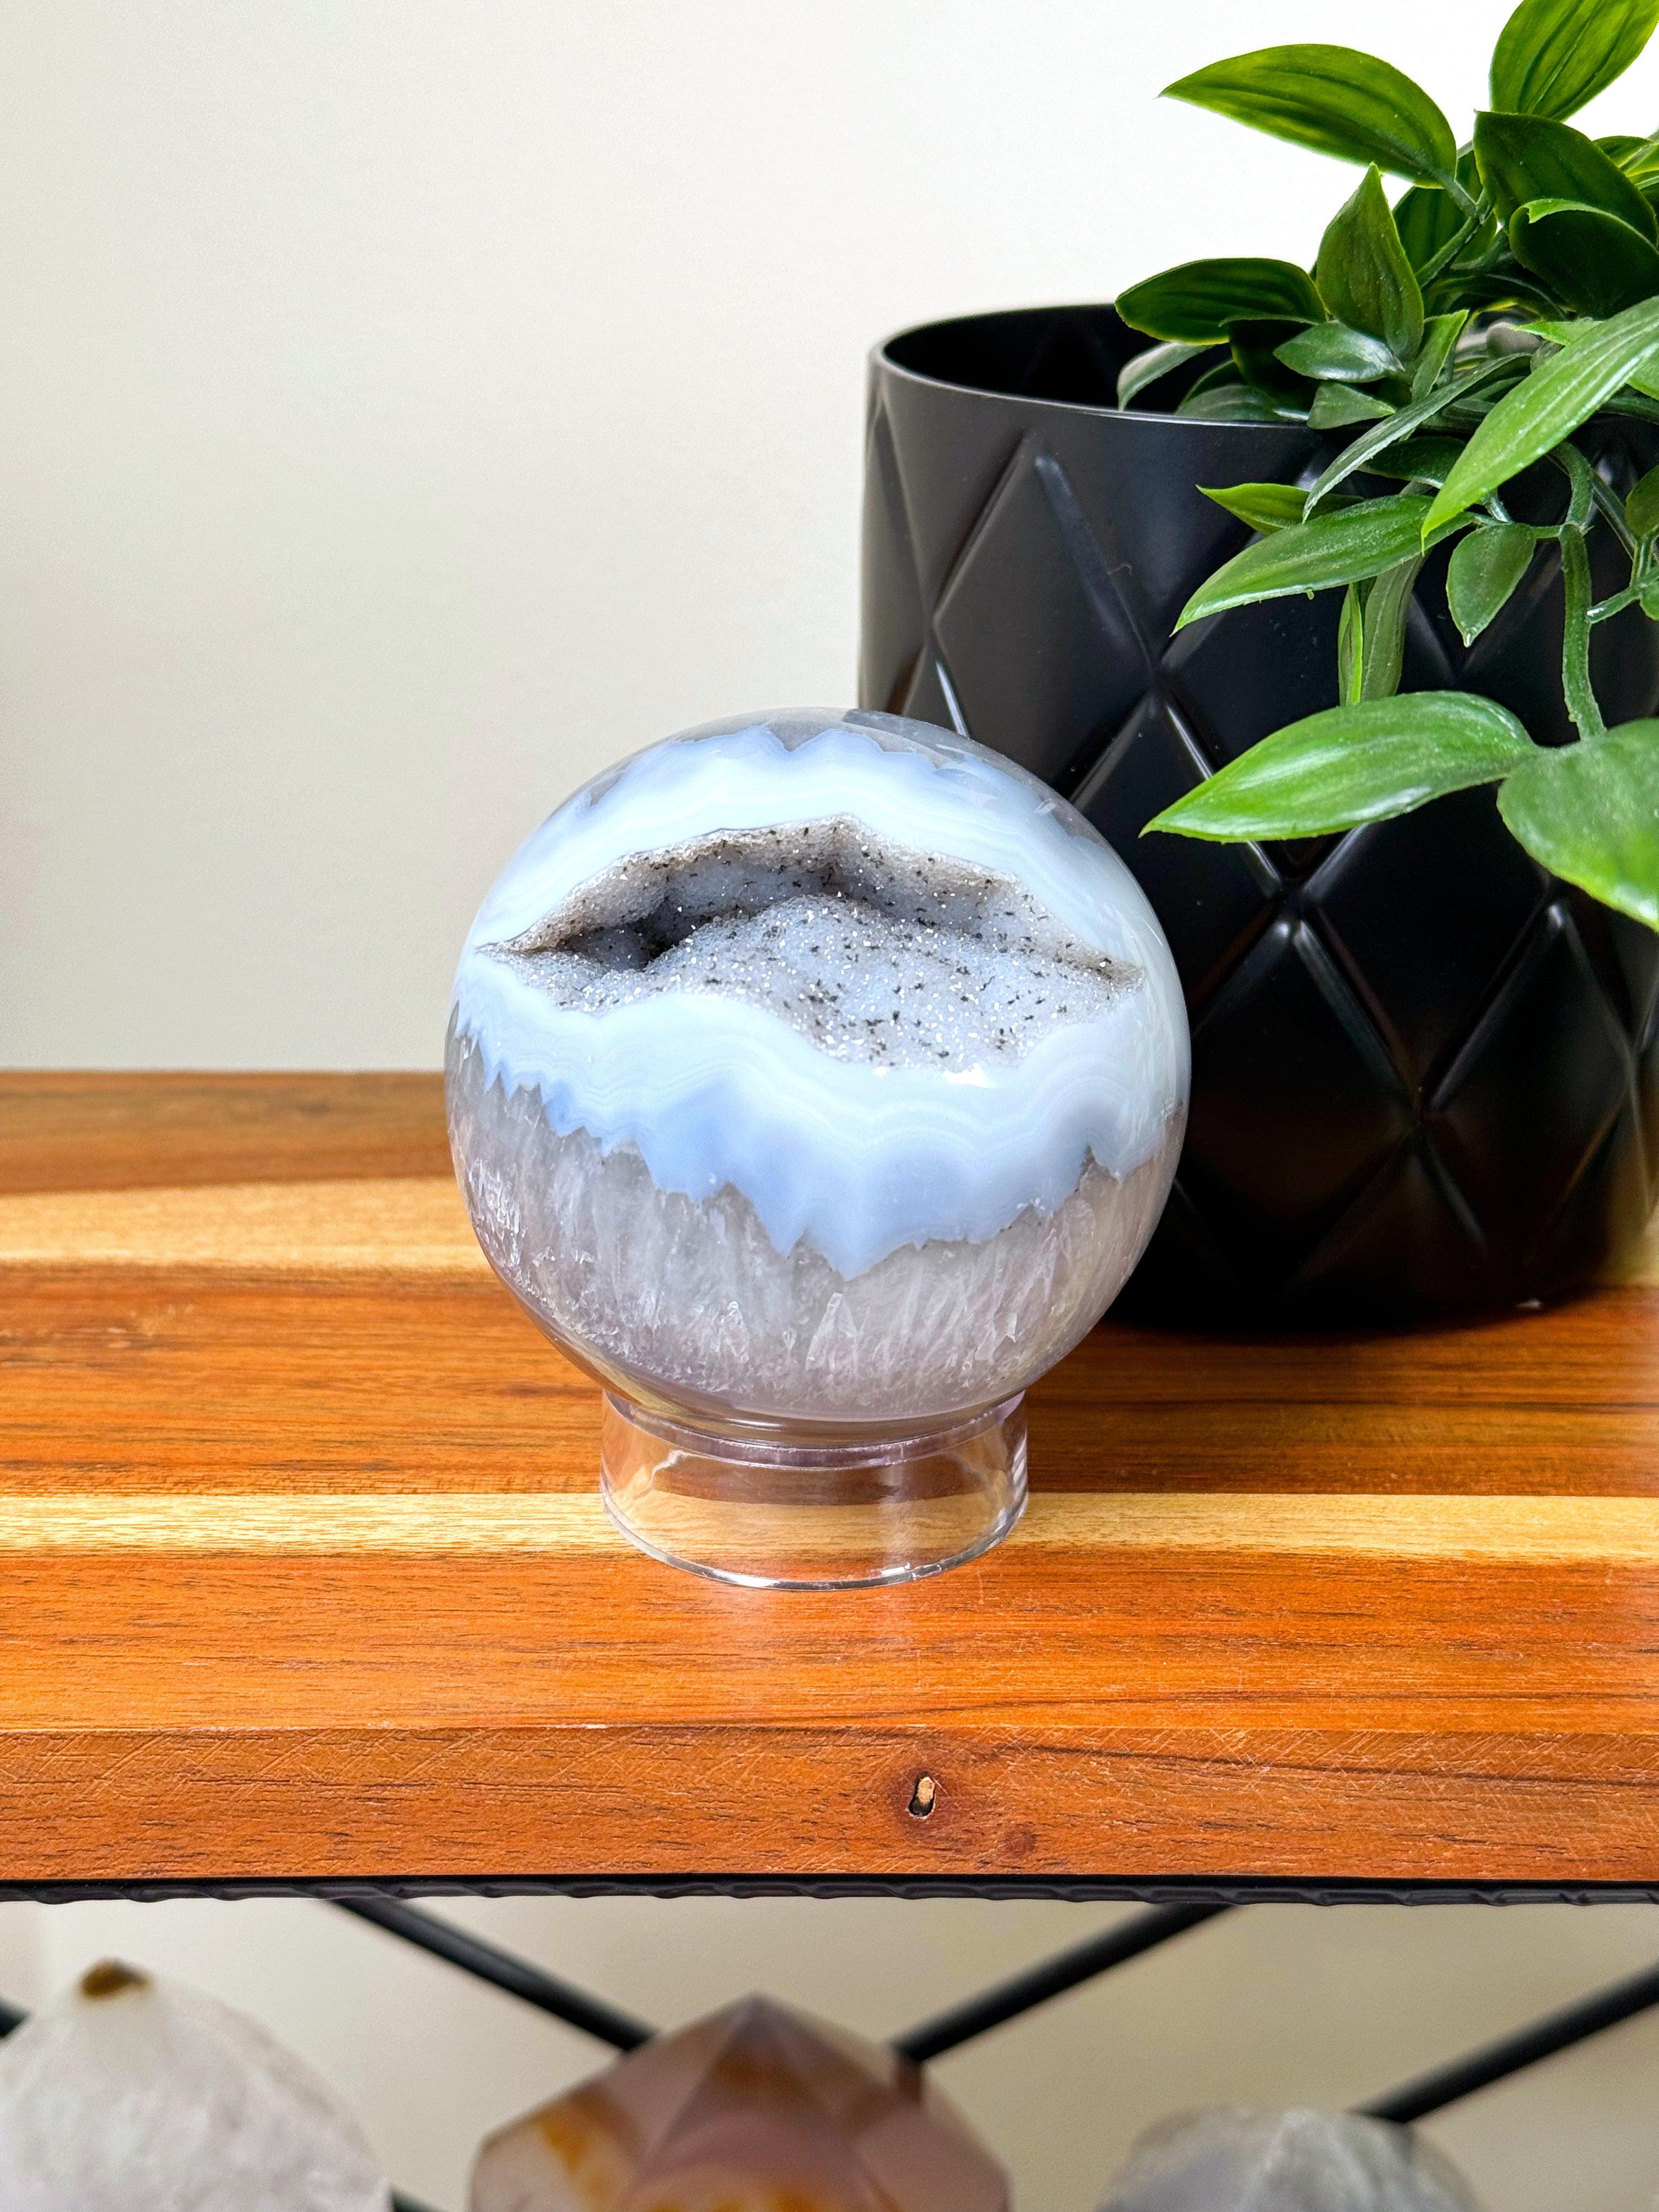 DRUZY AGATE SPHERE 5 - agate, druzy agate, googly agate, googly eye, googly eye agate, one of a kind, sphere, statement piece - The Mineral Maven